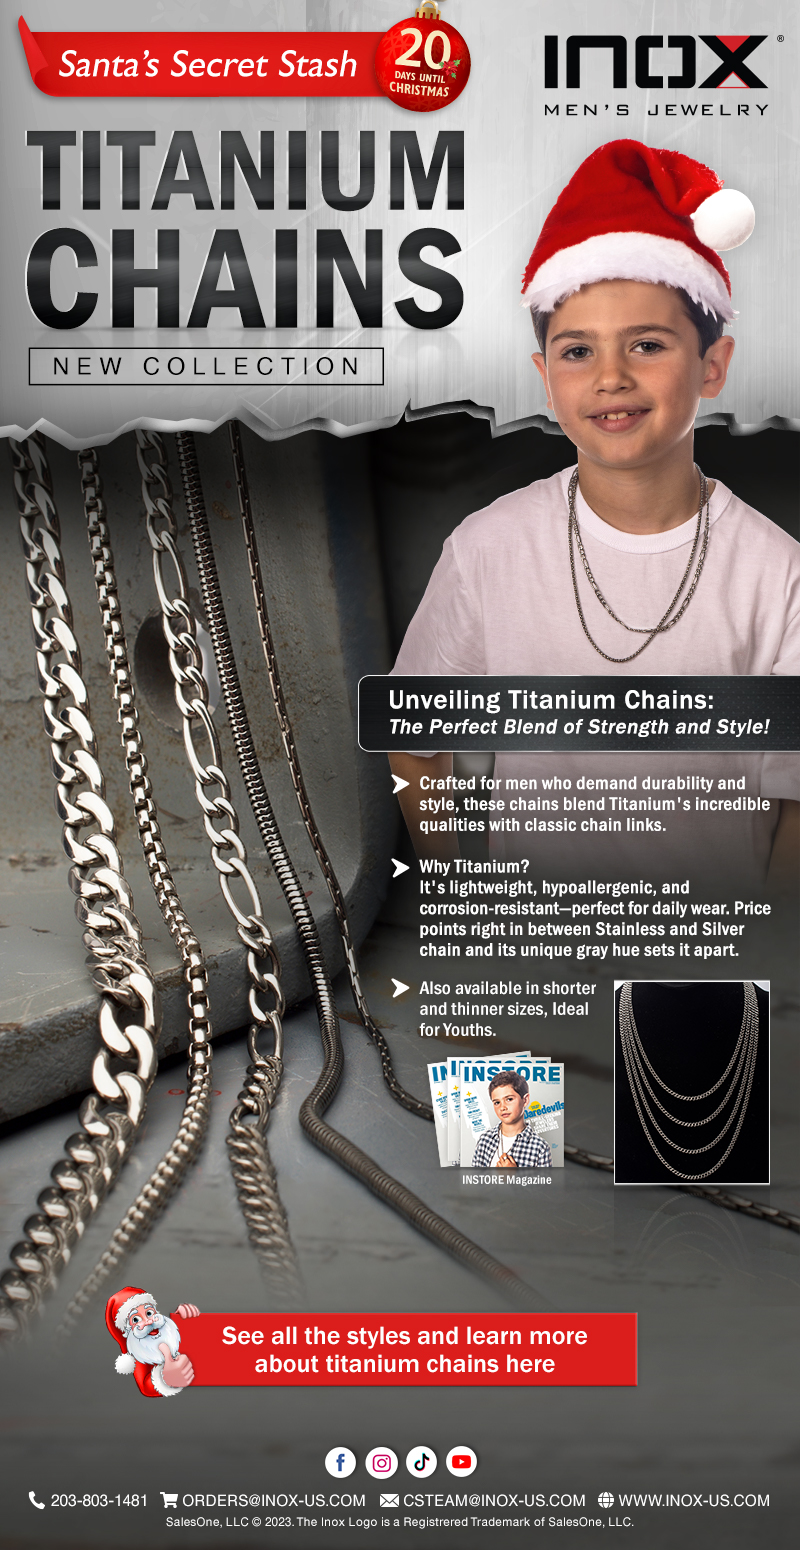 Unveiling the New Titanium Chain Collection